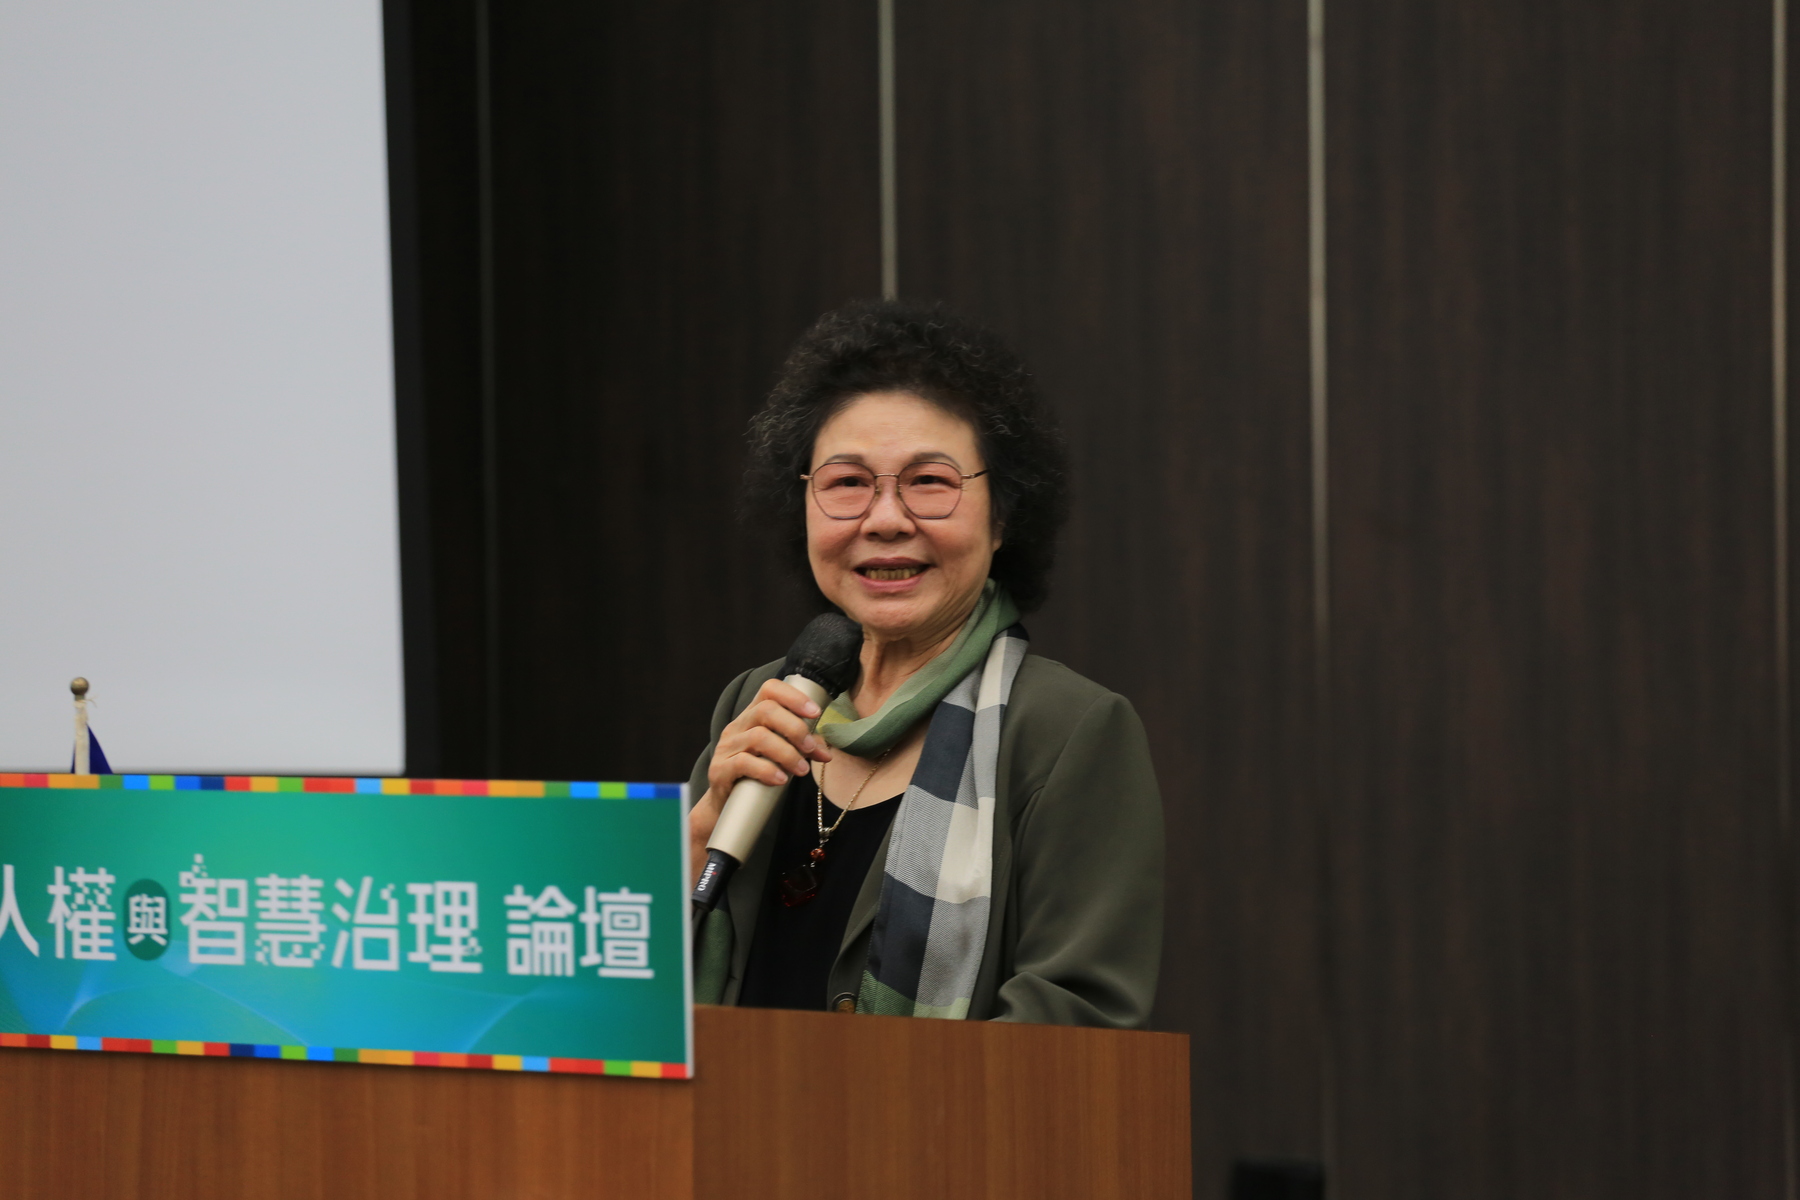 Chen Chu, the former mayor of Kaohsiung City and the Chairperson of the National Human Rights Commission (NHRC) was invited to return to NSYSU, her alma mater, to offer the opening remarks for the event. She encouraged students to expand their horizons with proactivity, to learn from multiple areas, to consider AI development with varied perspectives and tolerance, and to pay attention to human rights and social justice concerns.